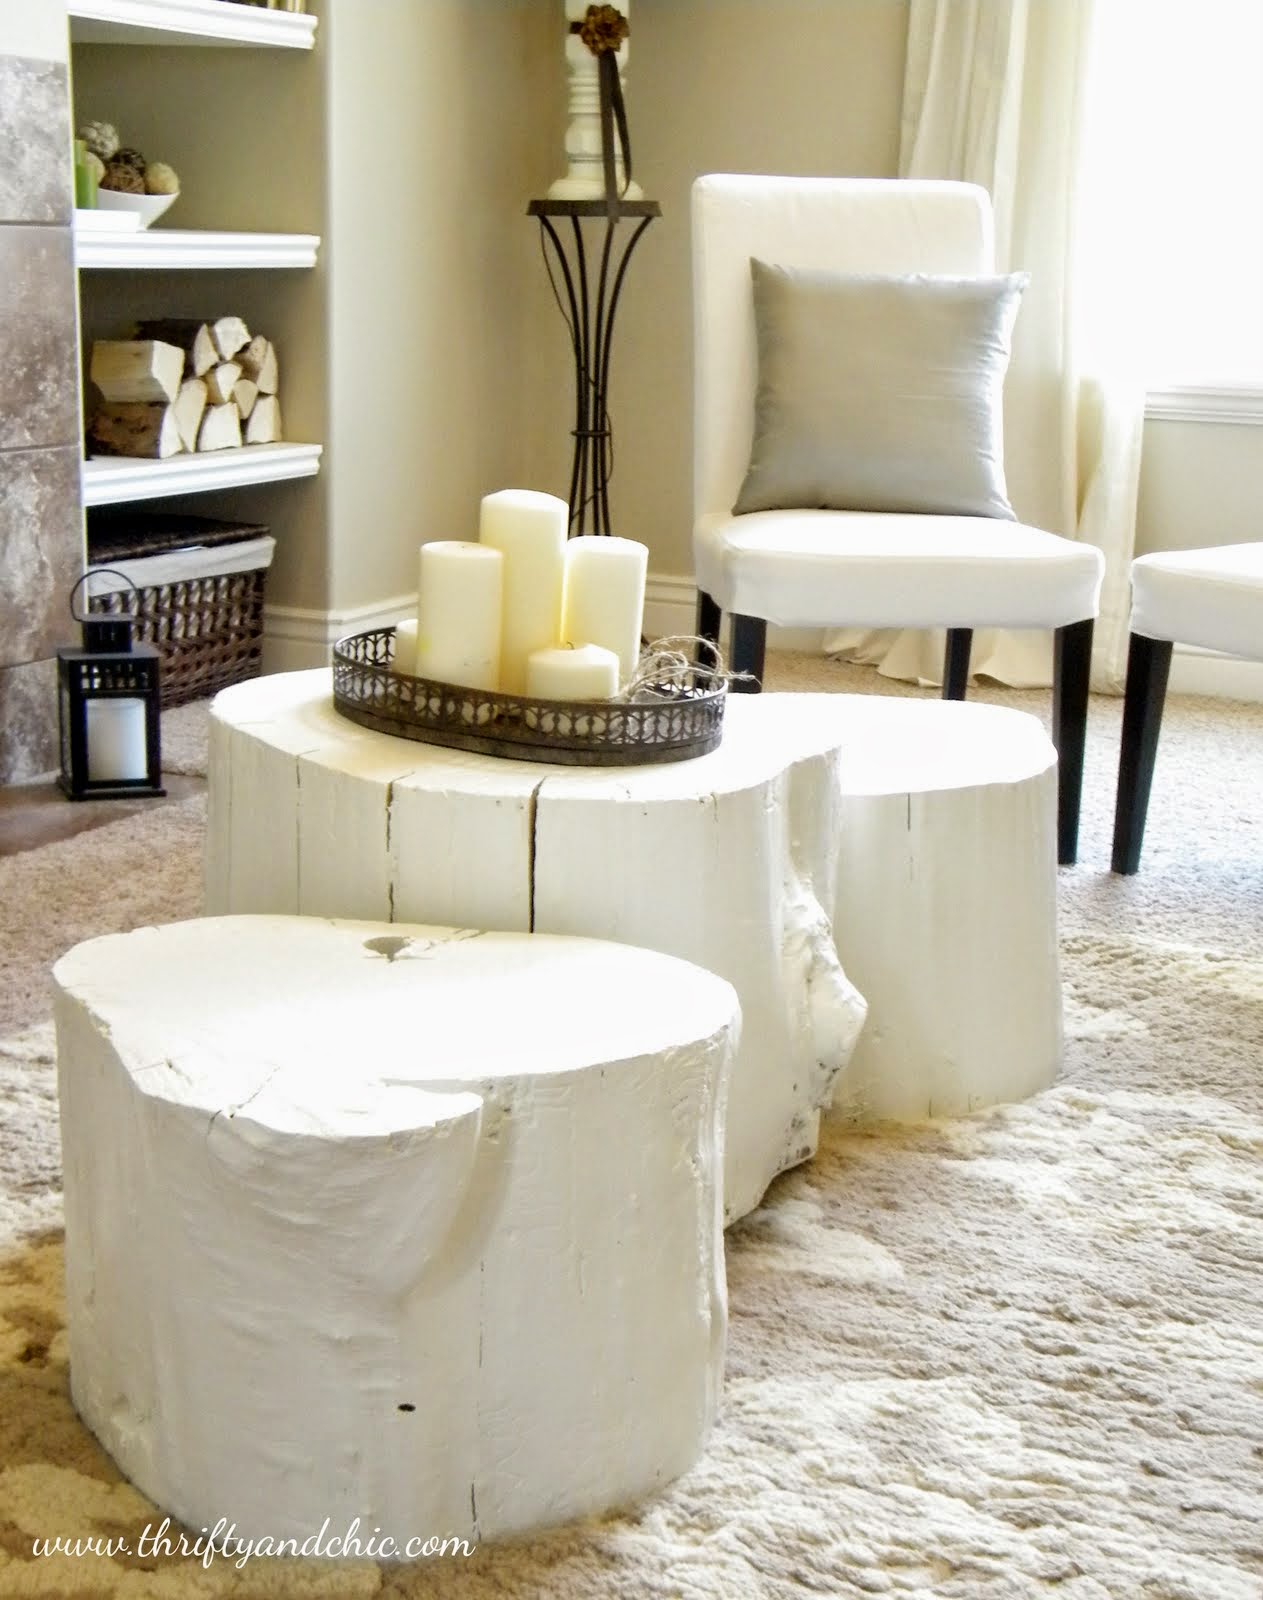 Spray Painted Tree Stumps Turned Side Tables -post shows how to pick your wood and where!